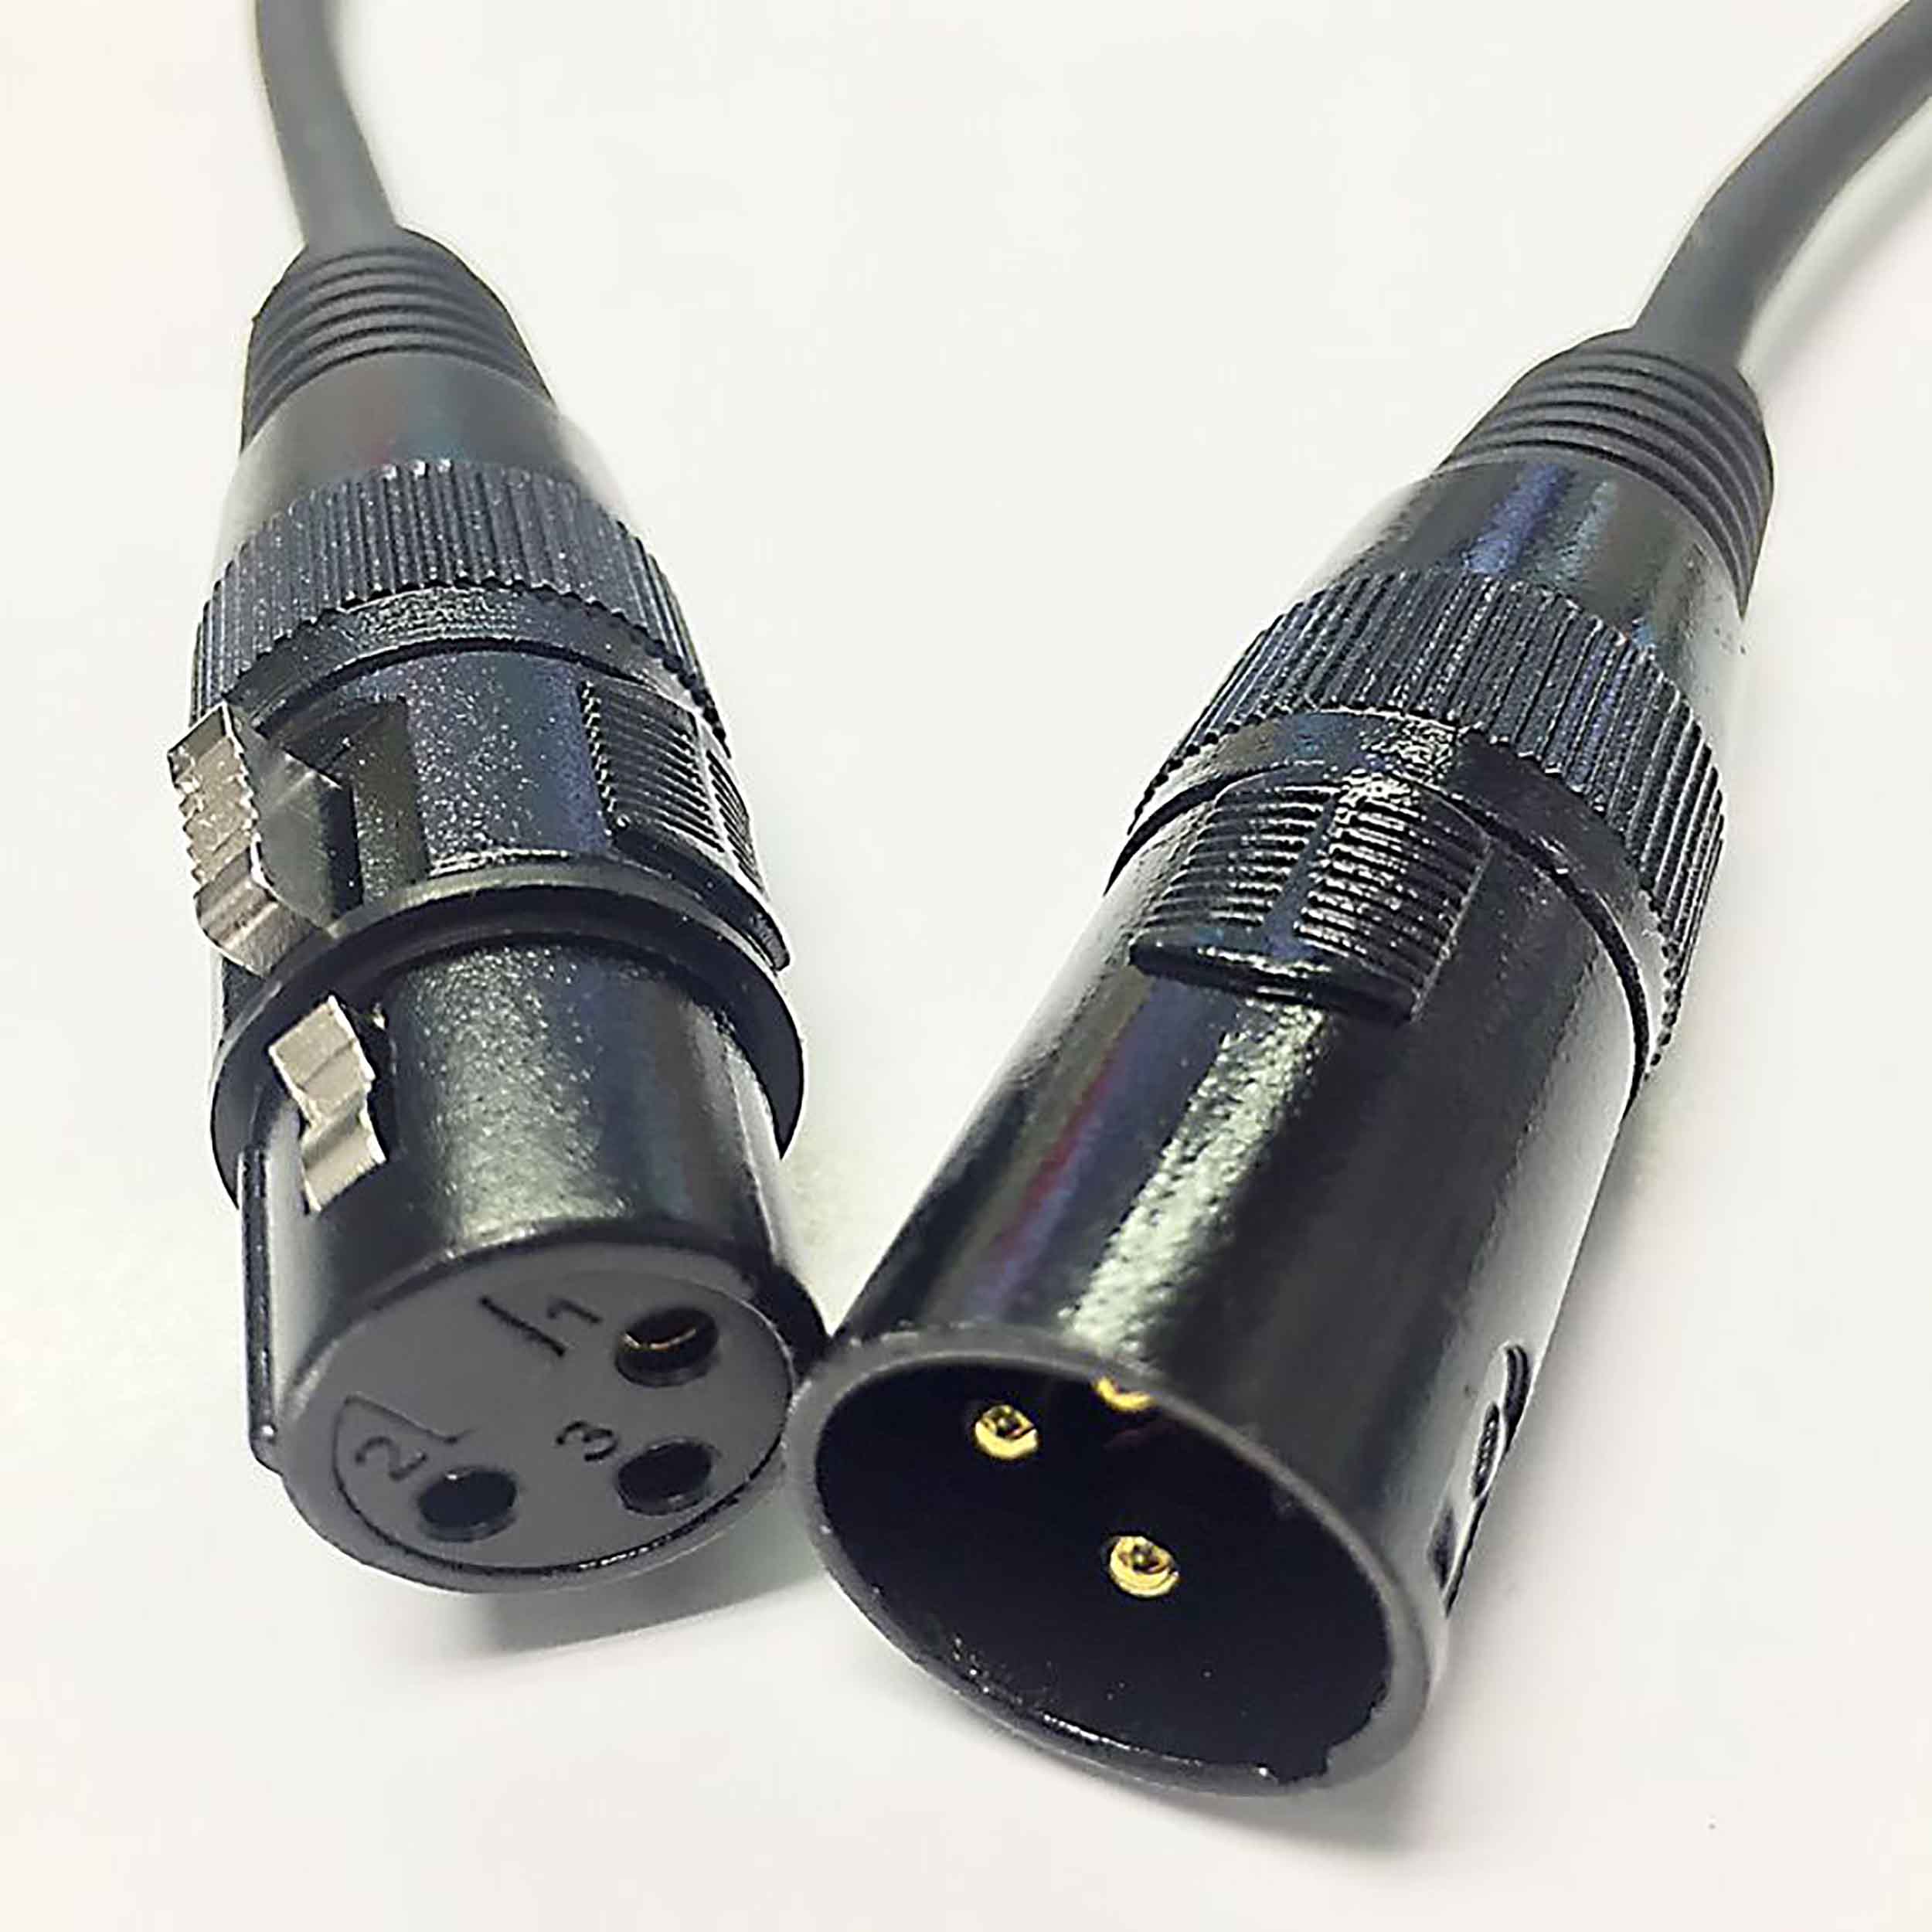 Accu-Cable AC3PDMX, 3-Pin Male To 3-Pin Female Connection DMX Cable by Accu Cable